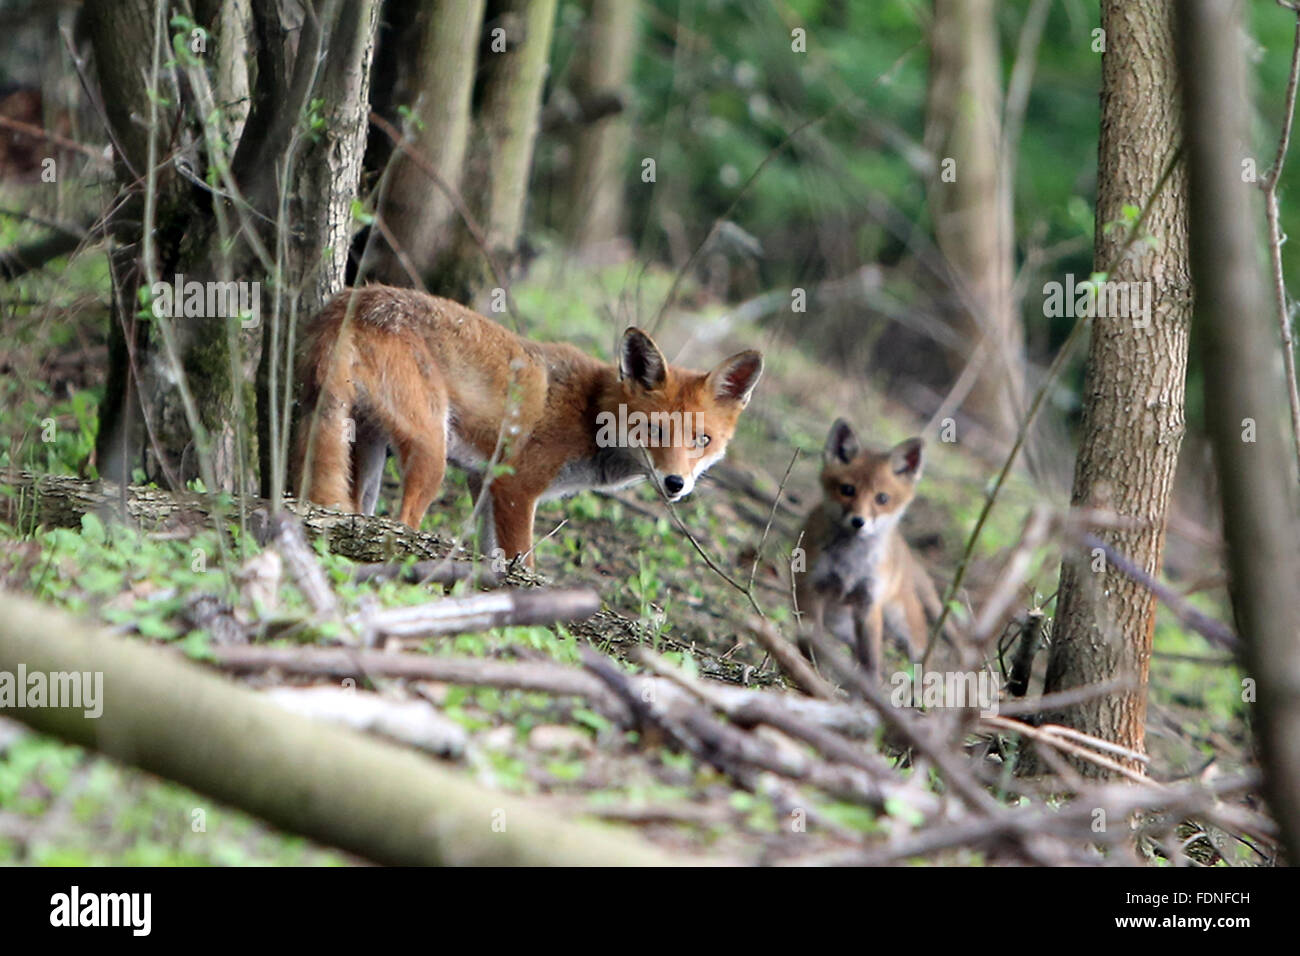 Berlin, Germany, foxes look attentive to the viewer Stock Photo